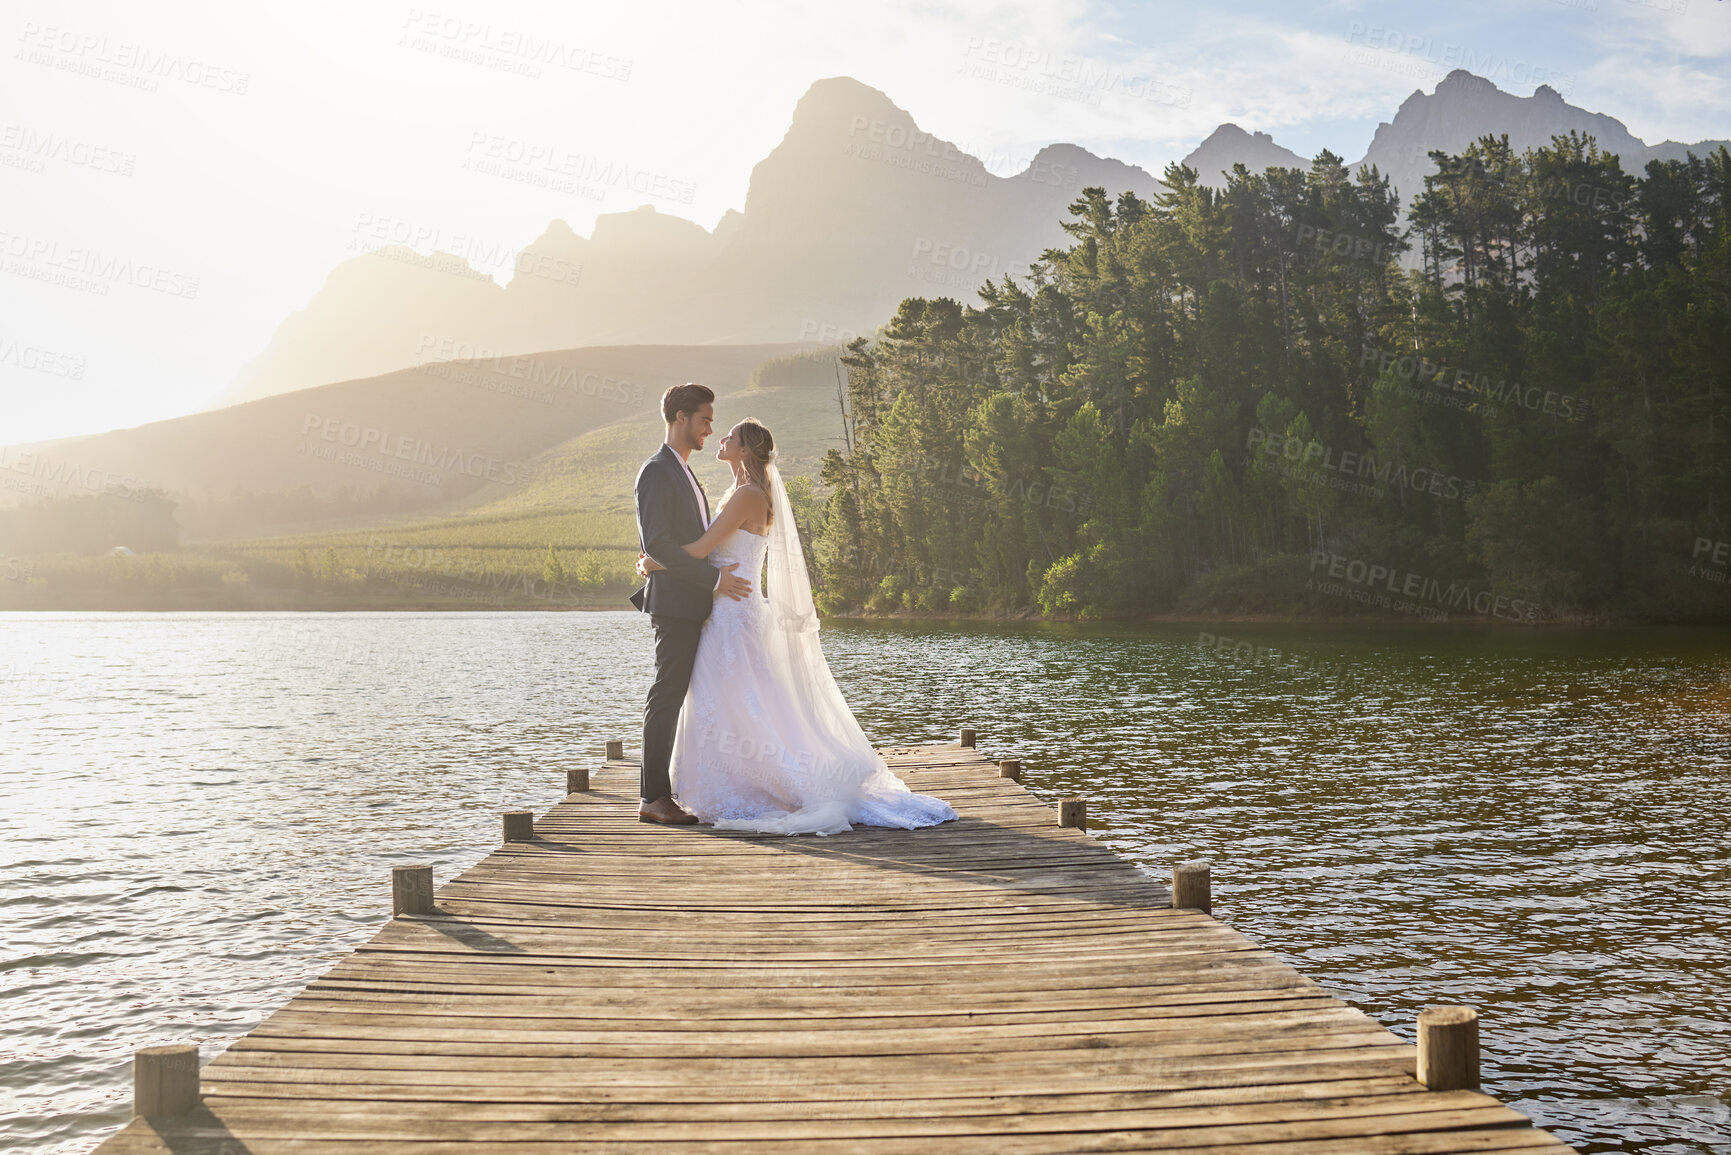 Buy stock photo Married, bride and groom on a pier over a lake in nature with a forest in the background after their ceremony. Wedding, love and water with a young couple in celebration of their marriage outdoor